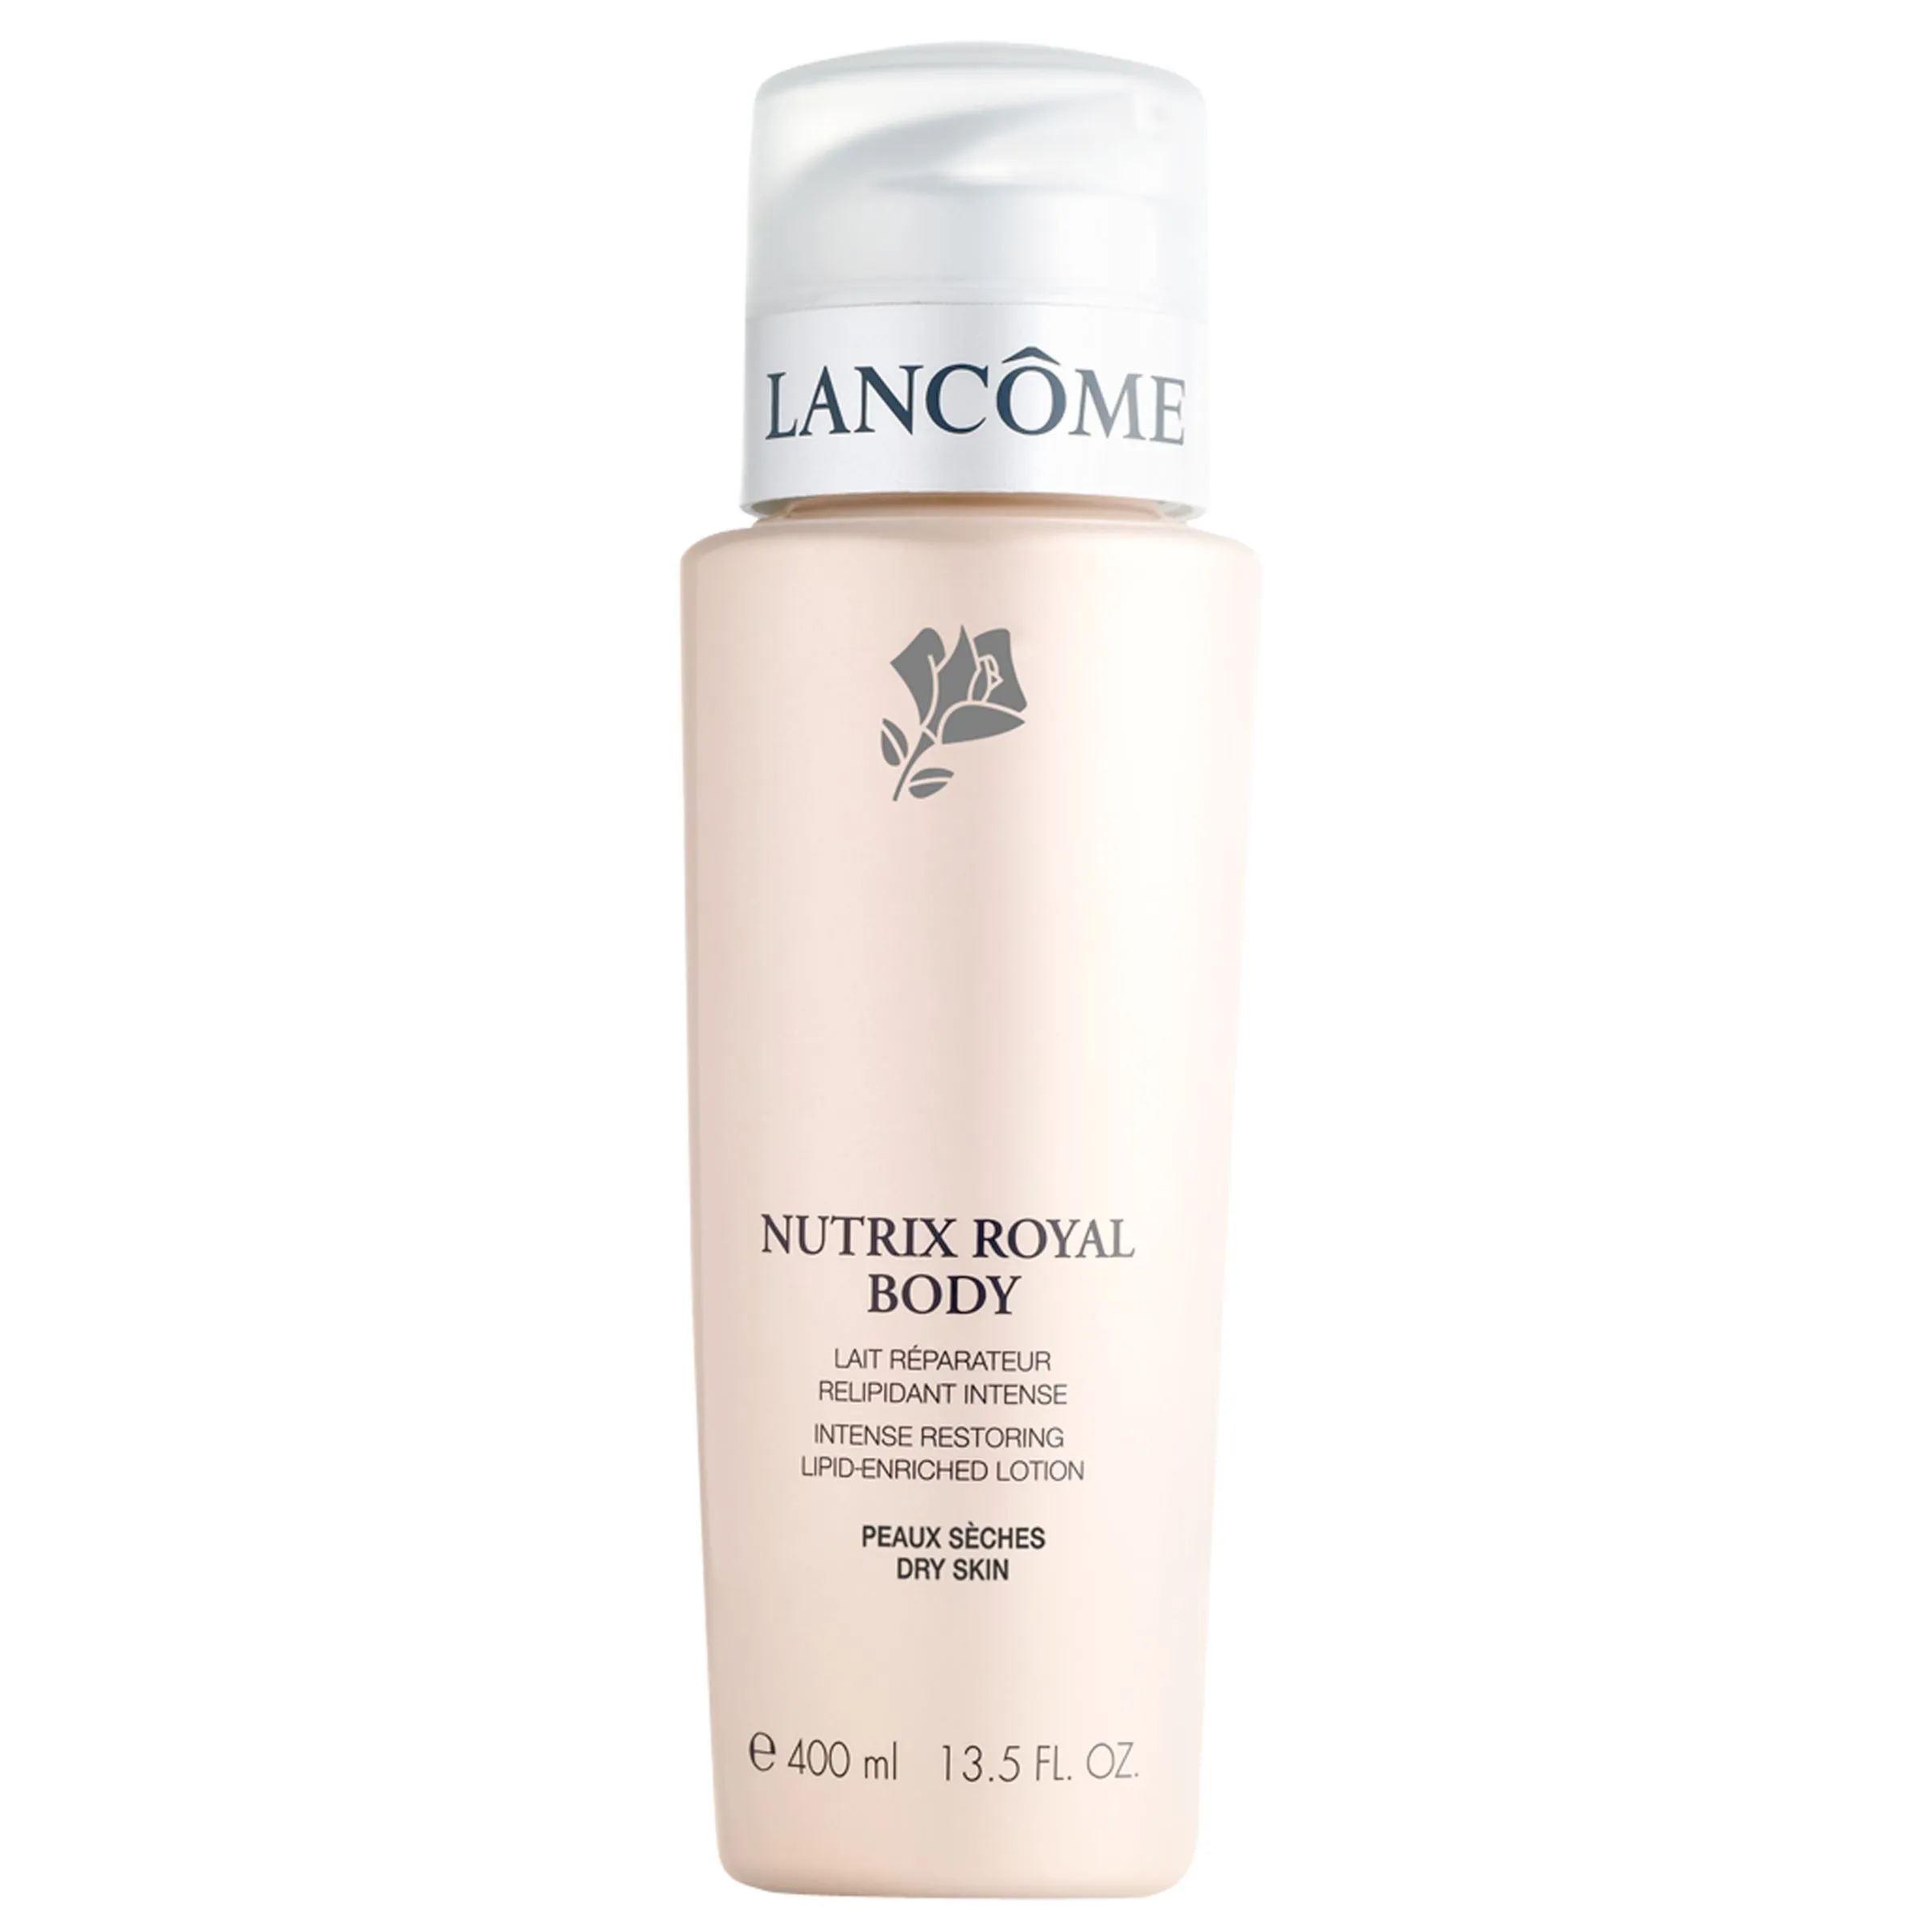 Nutrix Royal Body Lotion by Lancome, a luxurious, restoring French body lotion.